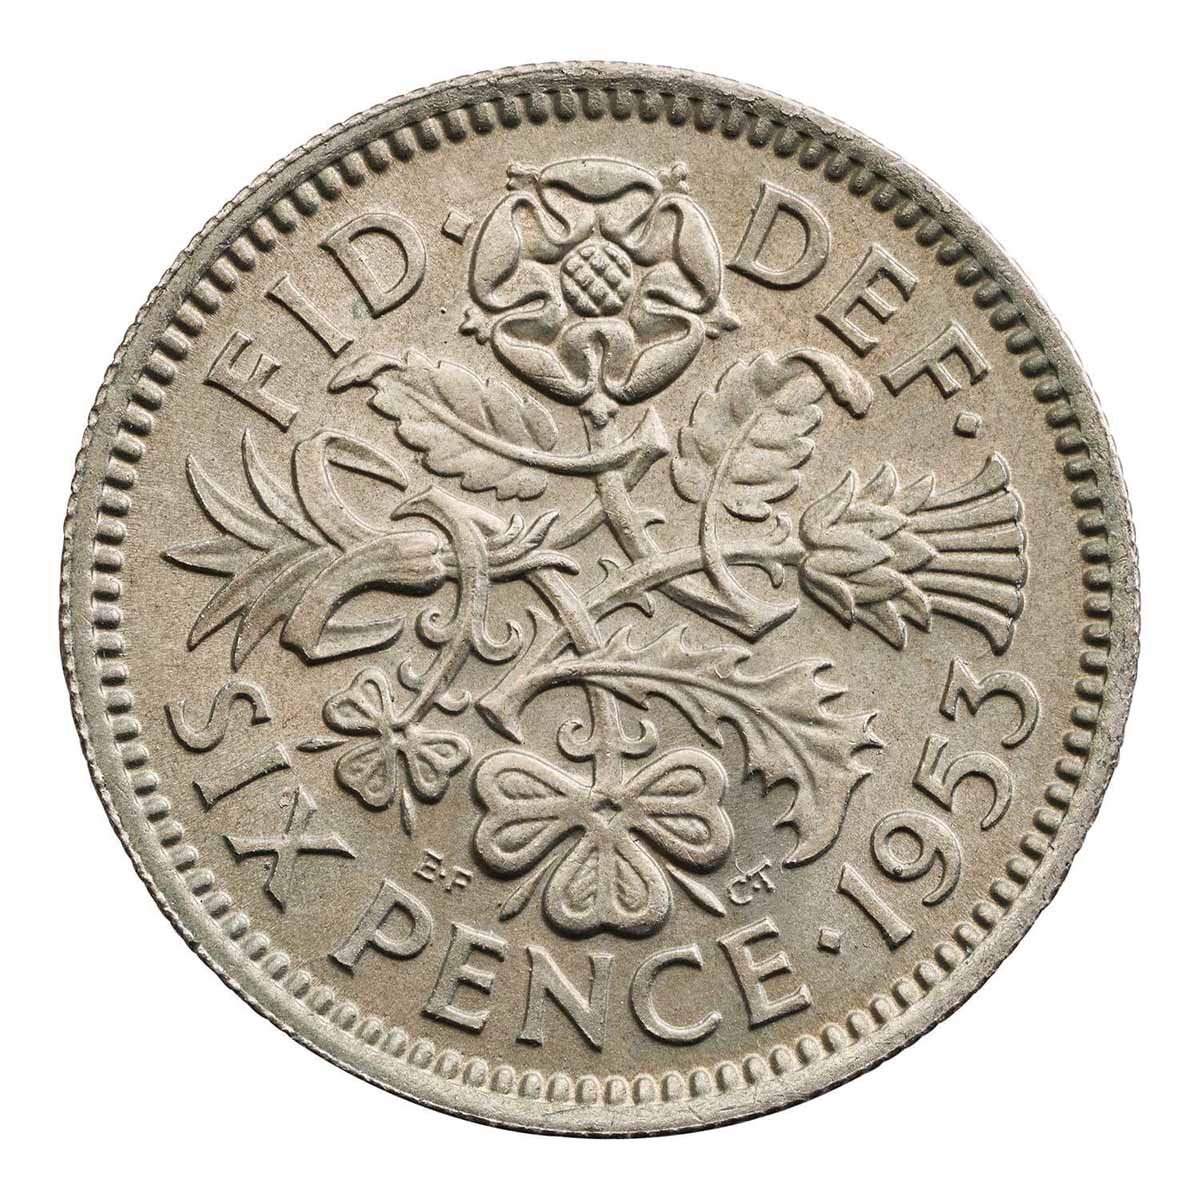 Coin Nicknames: The Sixpence - Tanner